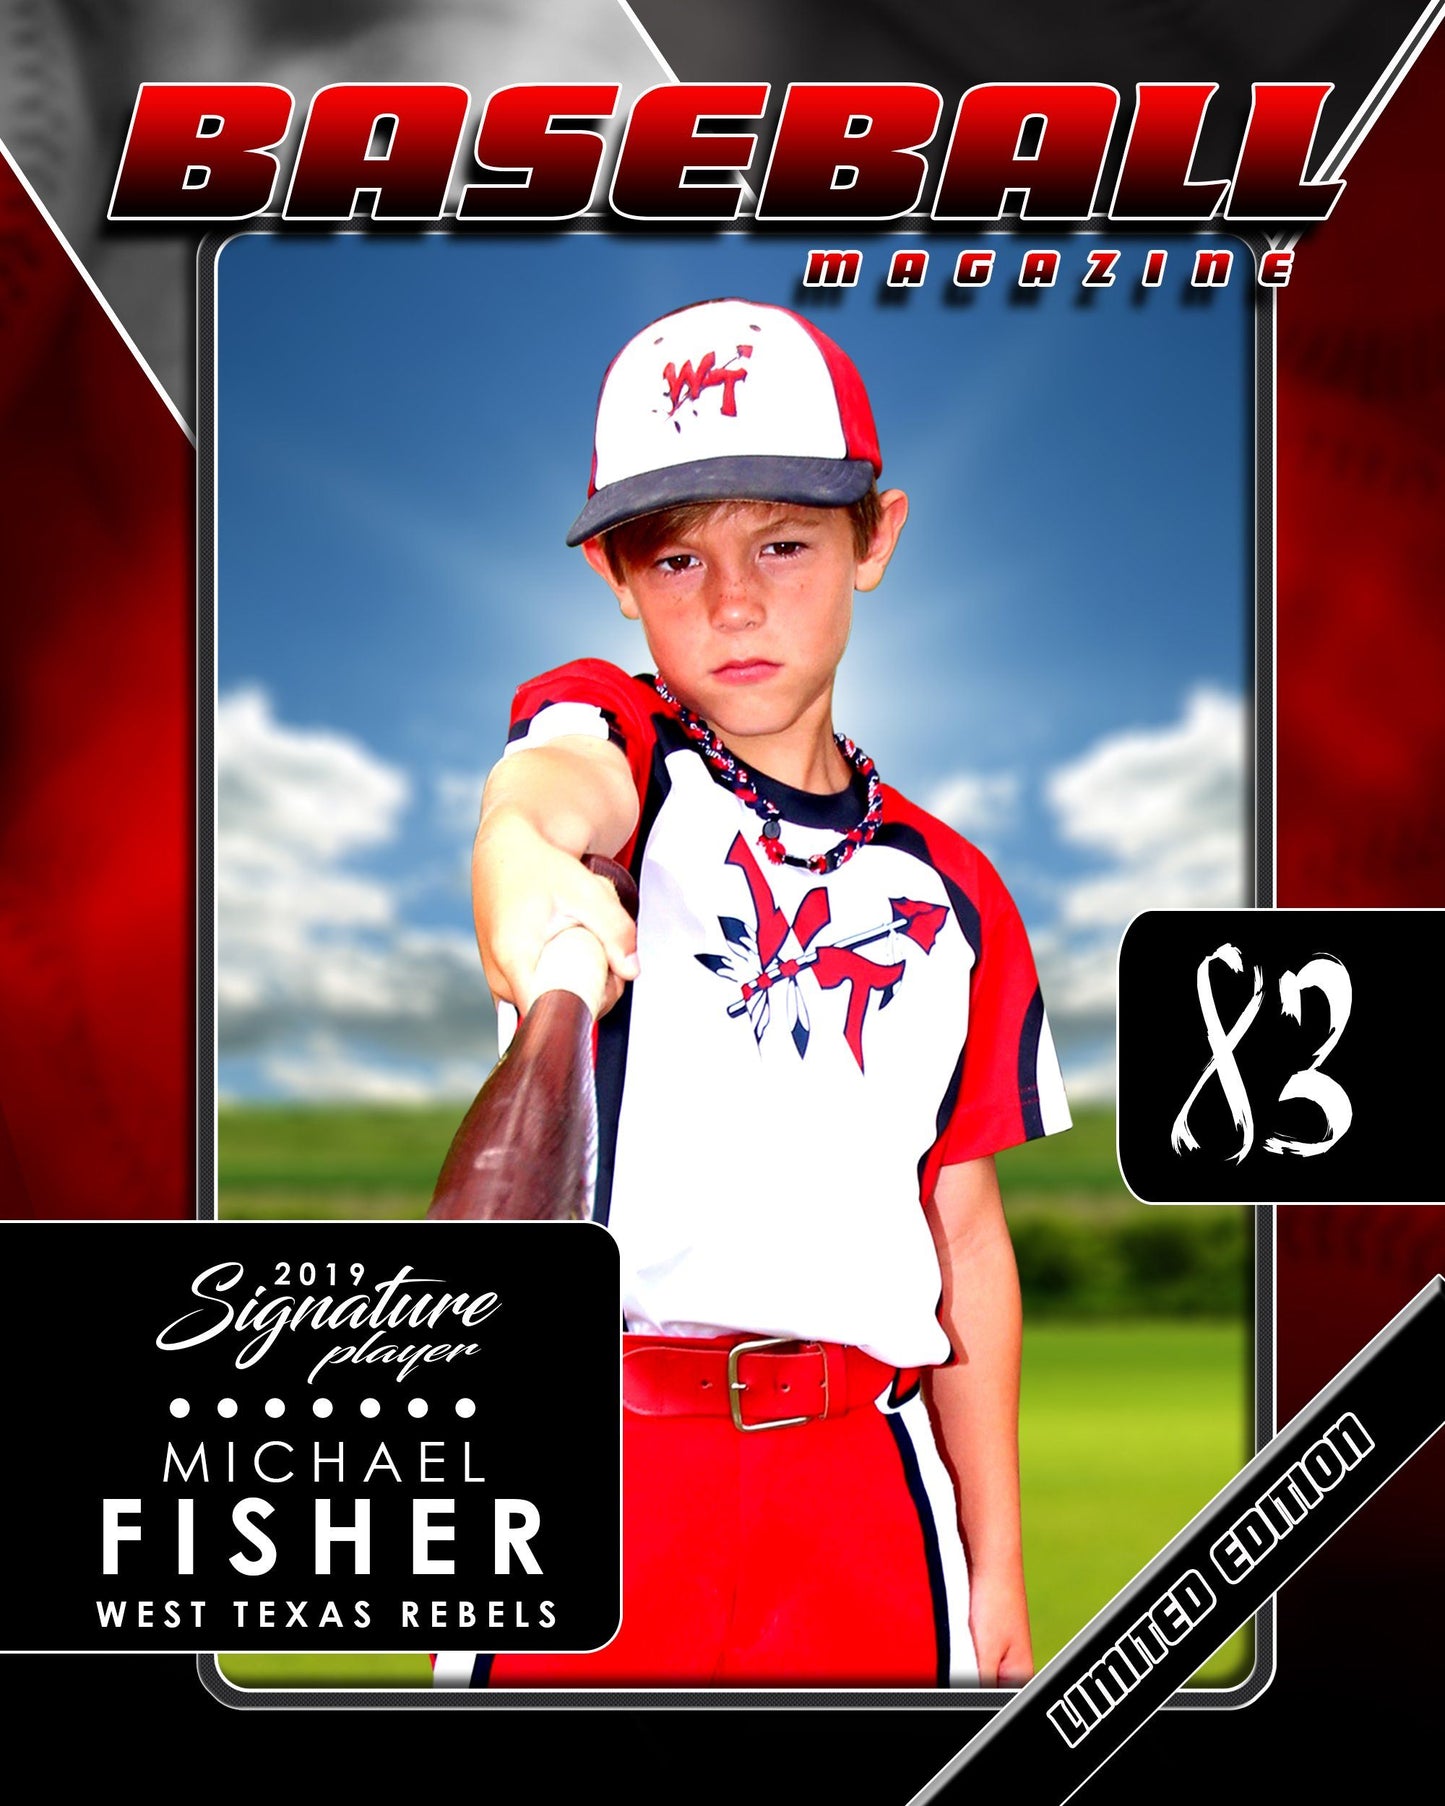 Signature Player - Baseball - V2 - Drop-In Magazine Cover Template-Photoshop Template - Photo Solutions